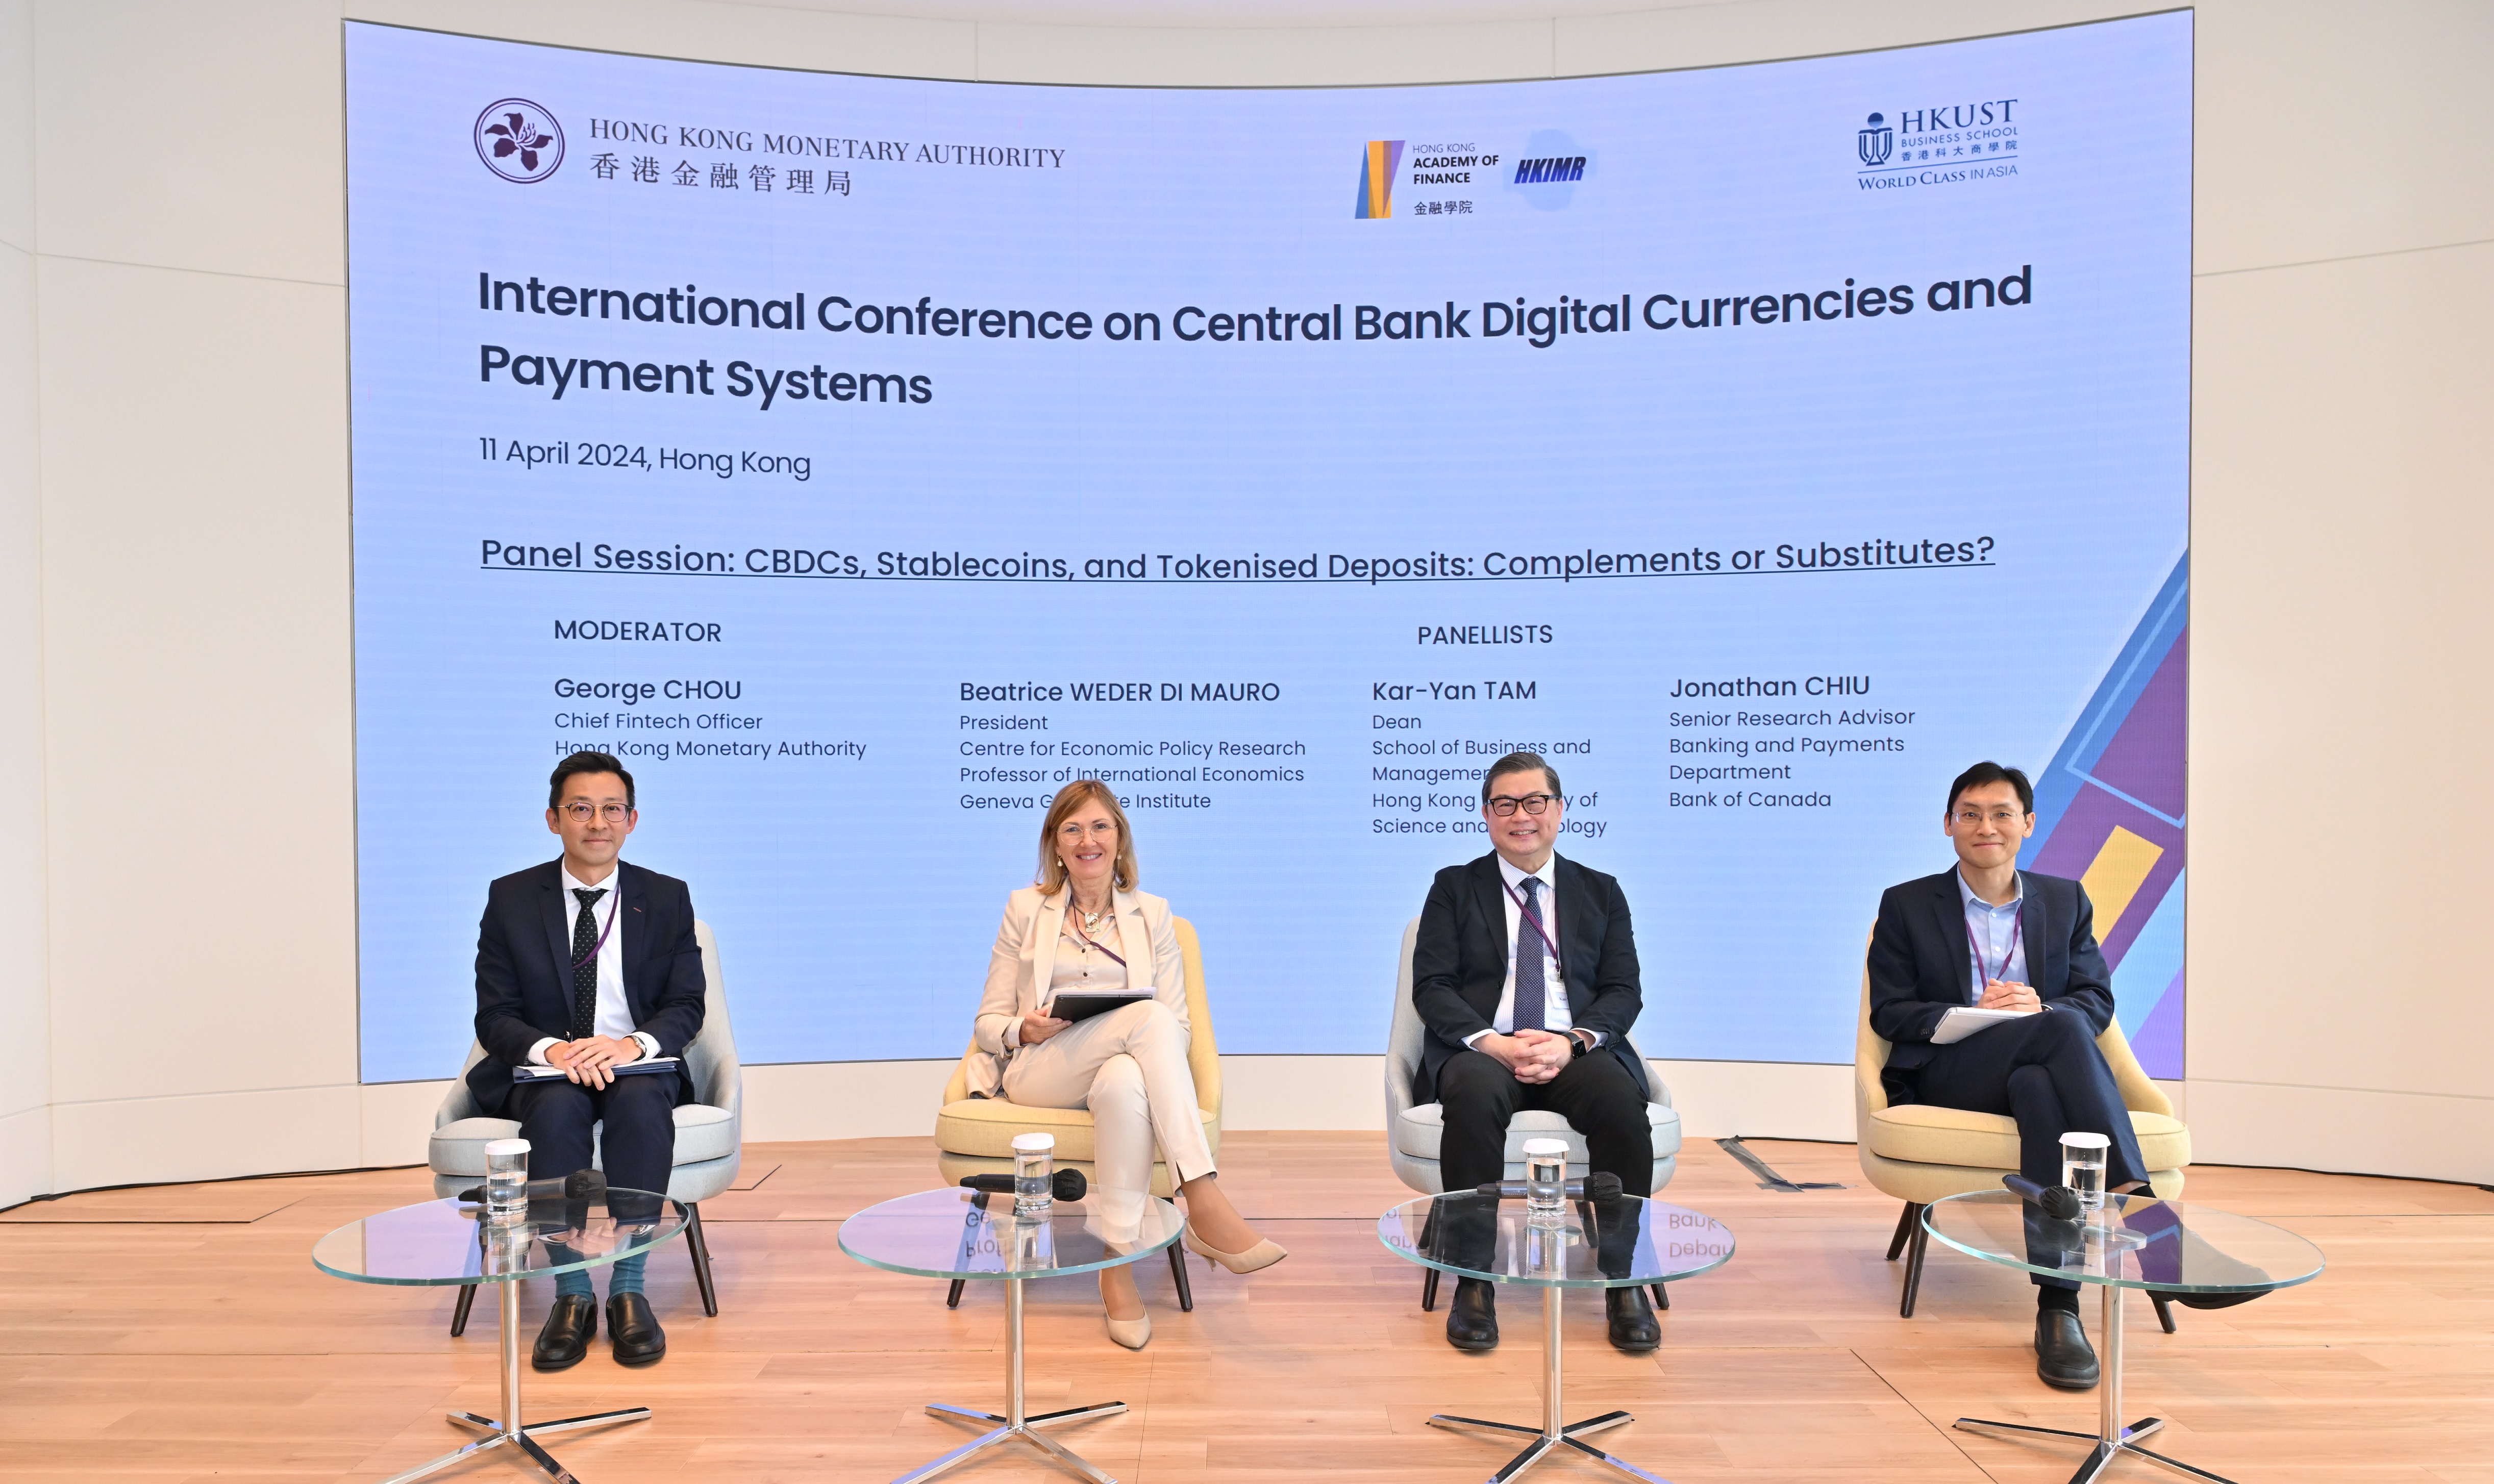 Mr George Chou, Chief Fintech Officer of the Hong Kong Monetary Authority, moderates a panel discussion titled “CBDCs, Stablecoins, and Tokenised Deposits: Complements or Substitutes?” with Dr Jonathan Chiu, Senior Research Advisor, Banking and Payments Department of Bank of Canada; Professor Kar-Yan Tam, Dean, School of Business and Management of The Hong Kong University of Science and Technology; and Professor Beatrice Weder Di Mauro, President of Centre for Economic Policy Research and Professor of International Economics of Geneva Graduate Institute.